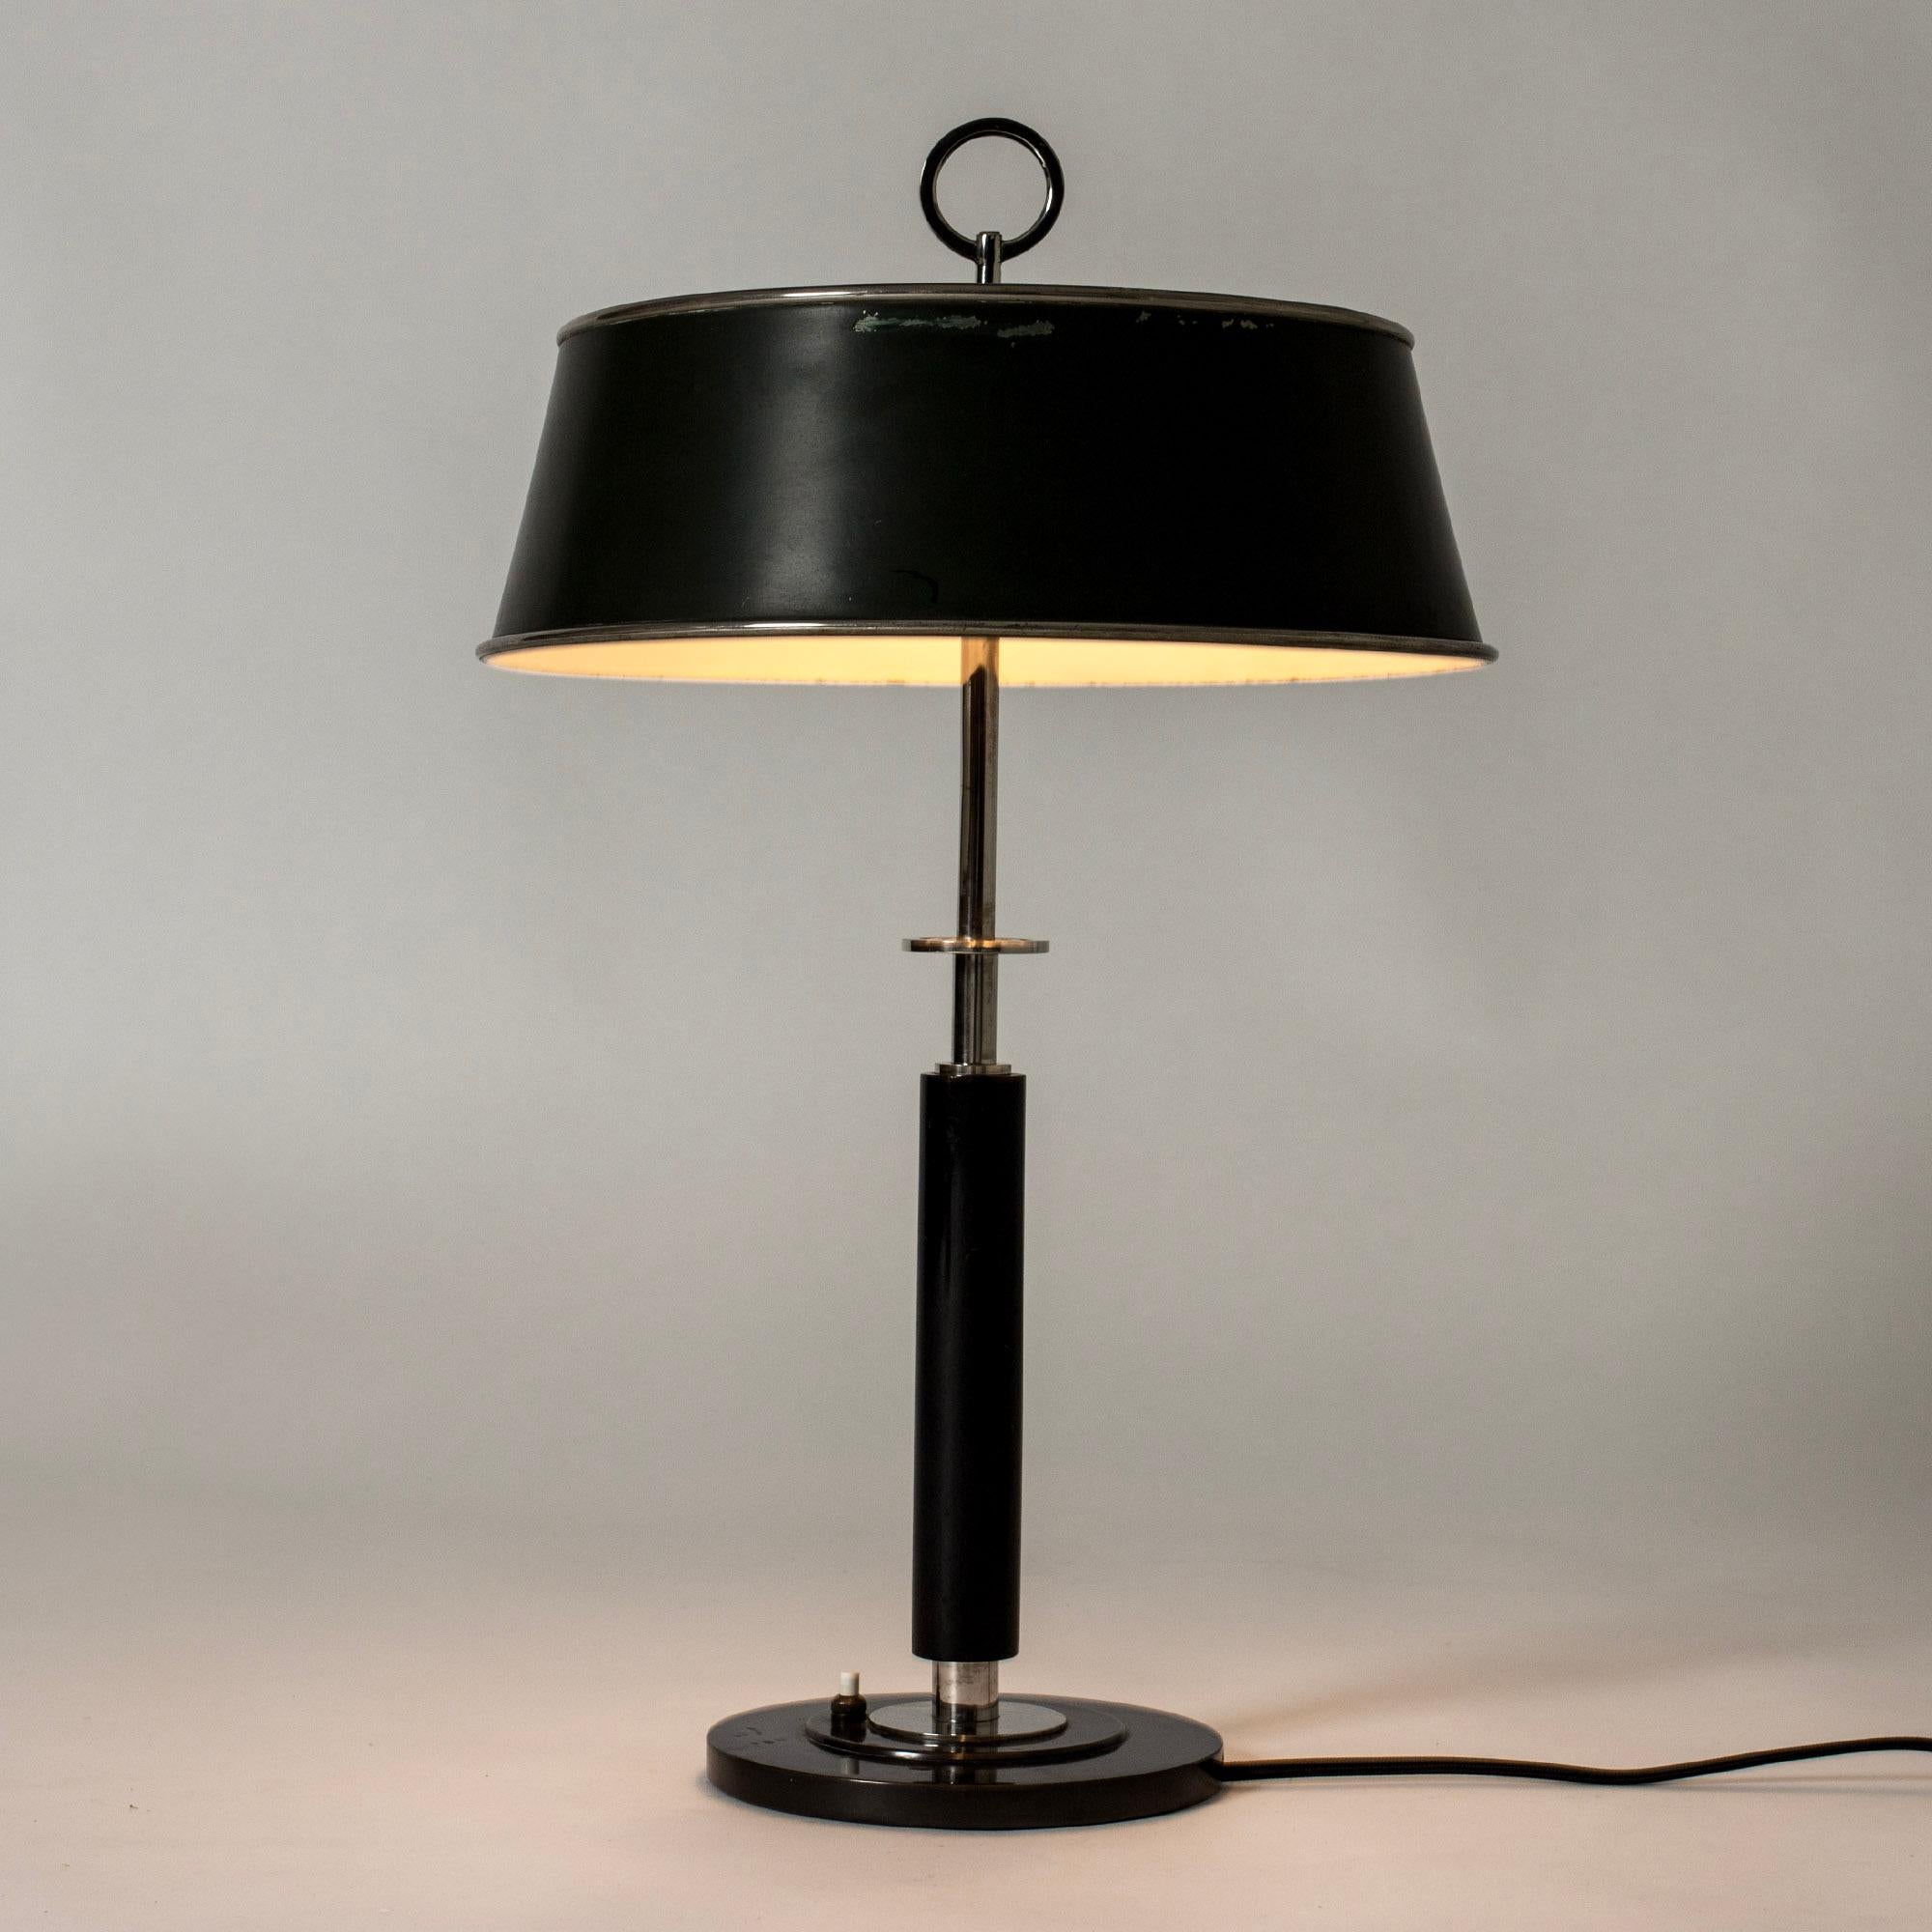 Elegant functionalist table lamp by Erik Tidstrand, made from metal with a dark green lacquered shade. Black handle and base, decorative white metal details in a graphic design.